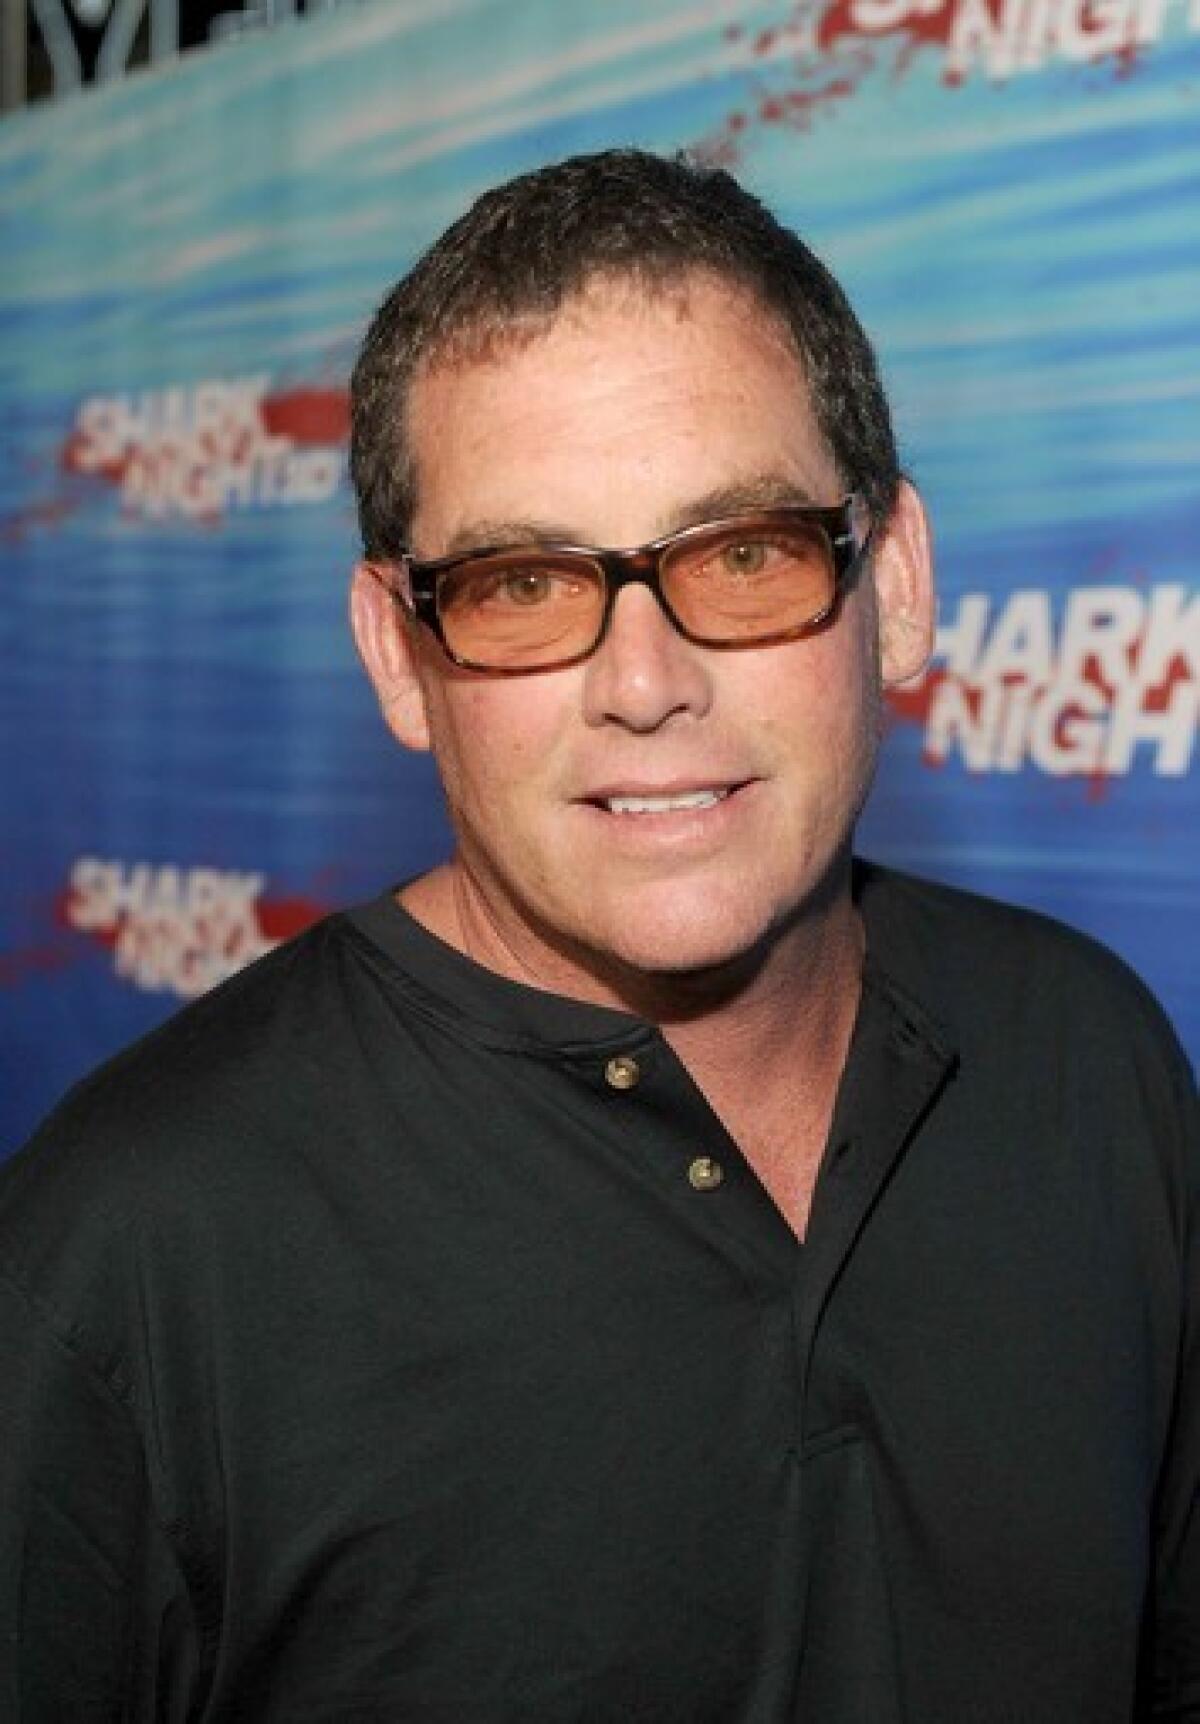 Mike Fleiss, seen here at the "Shark Night 3D" premiere in 2011, has been unable to replicate the success of "The Bachelor" franchise elsewhere on TV.